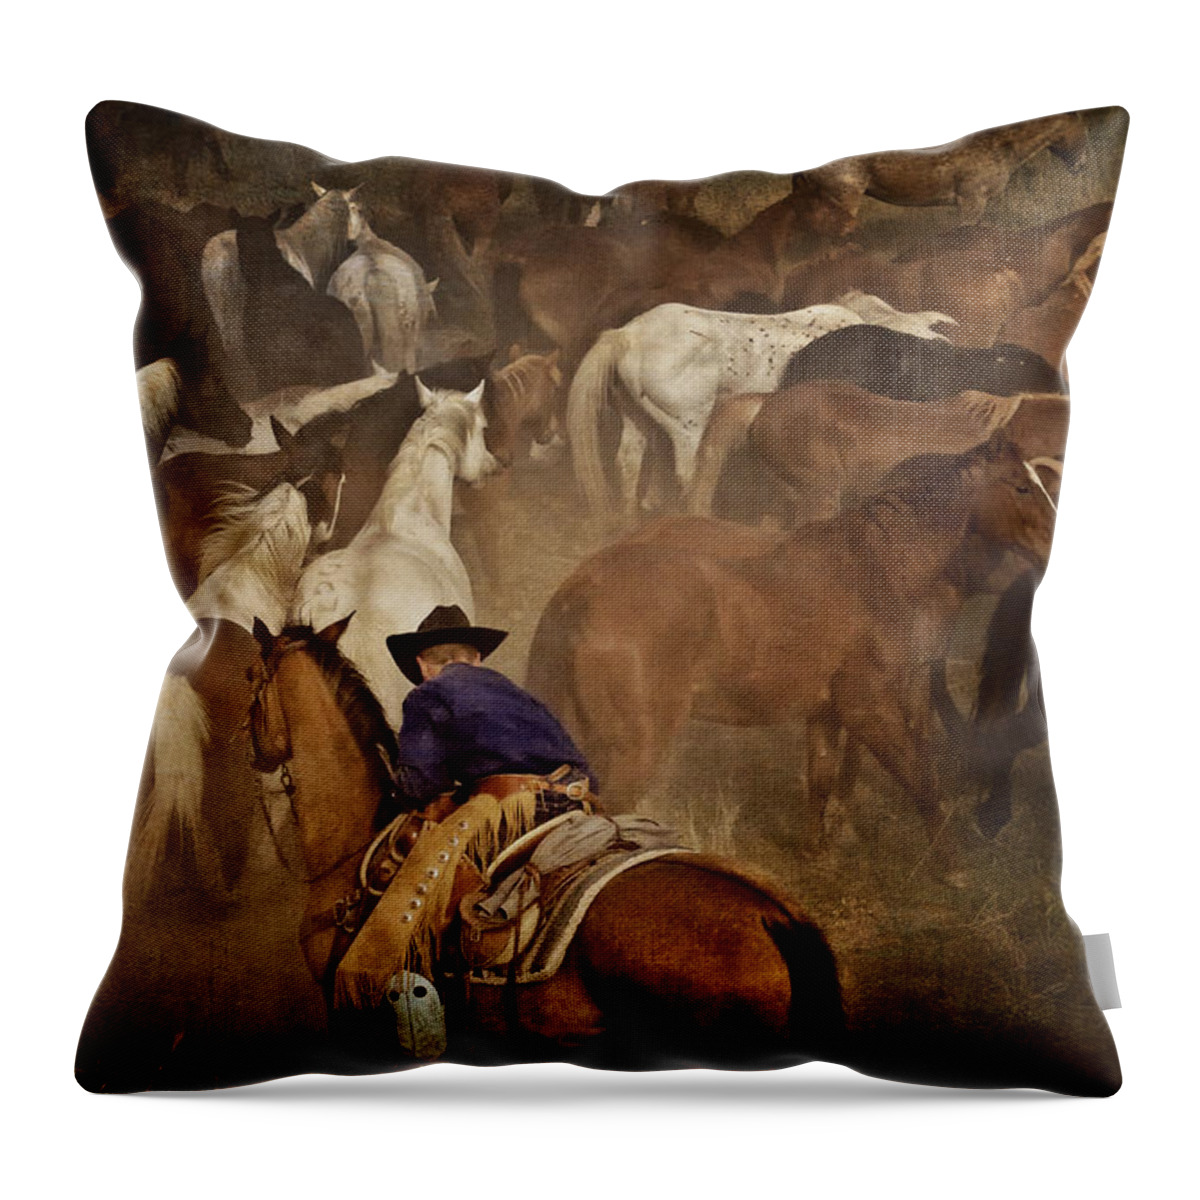 Horse Throw Pillow featuring the photograph Holding Herd by Pamela Steege